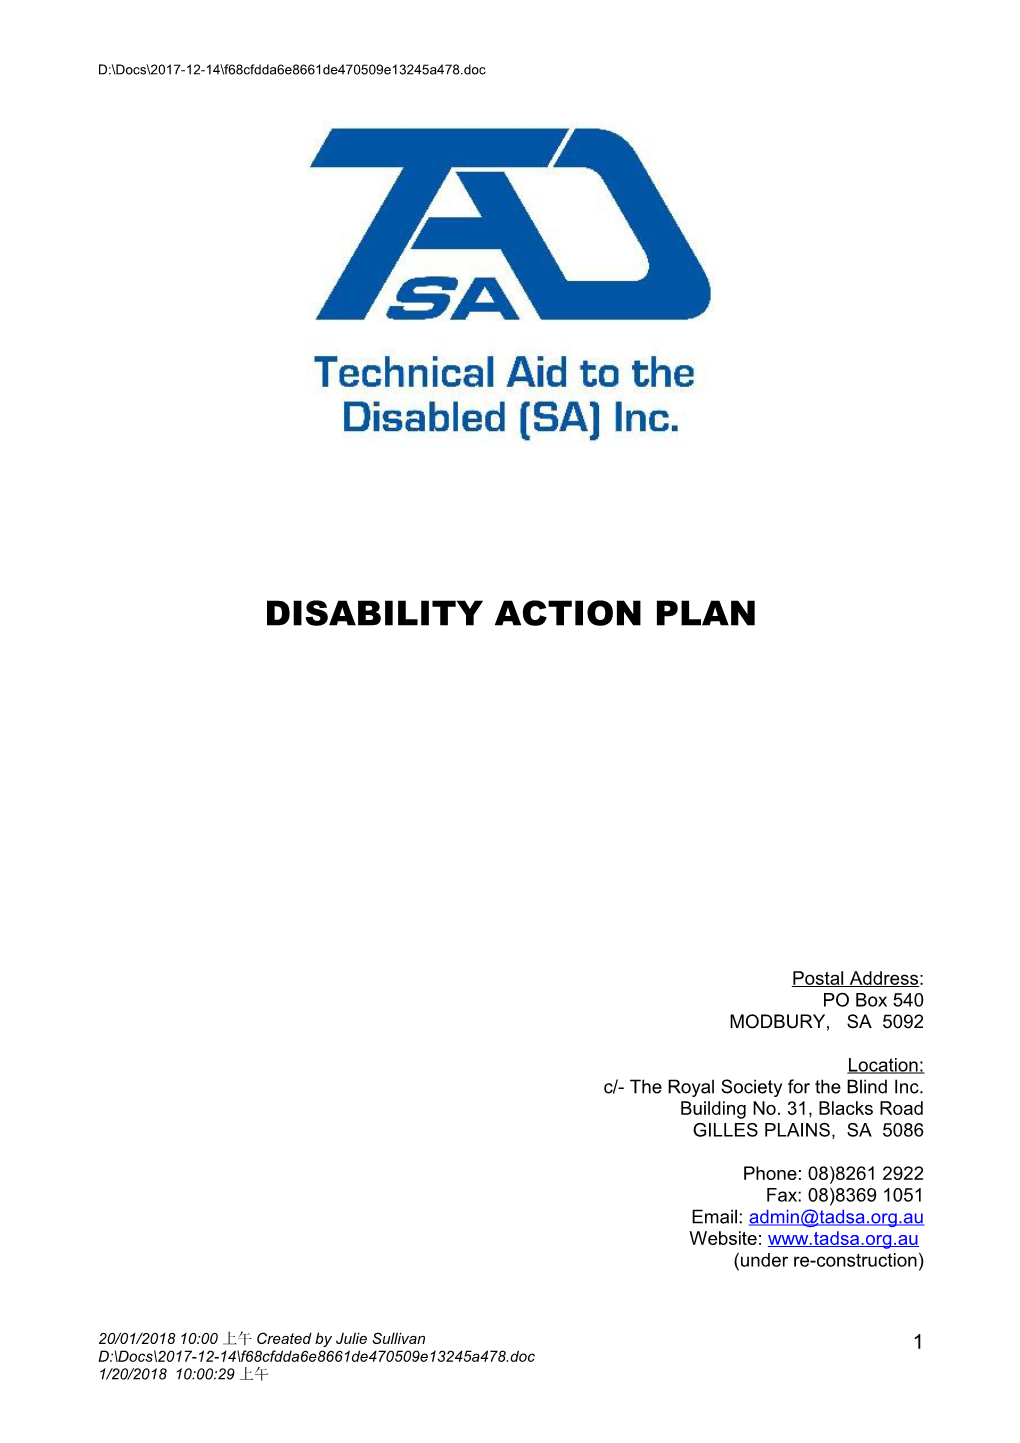 Technical Aid to the Disabled (Sa) Inc